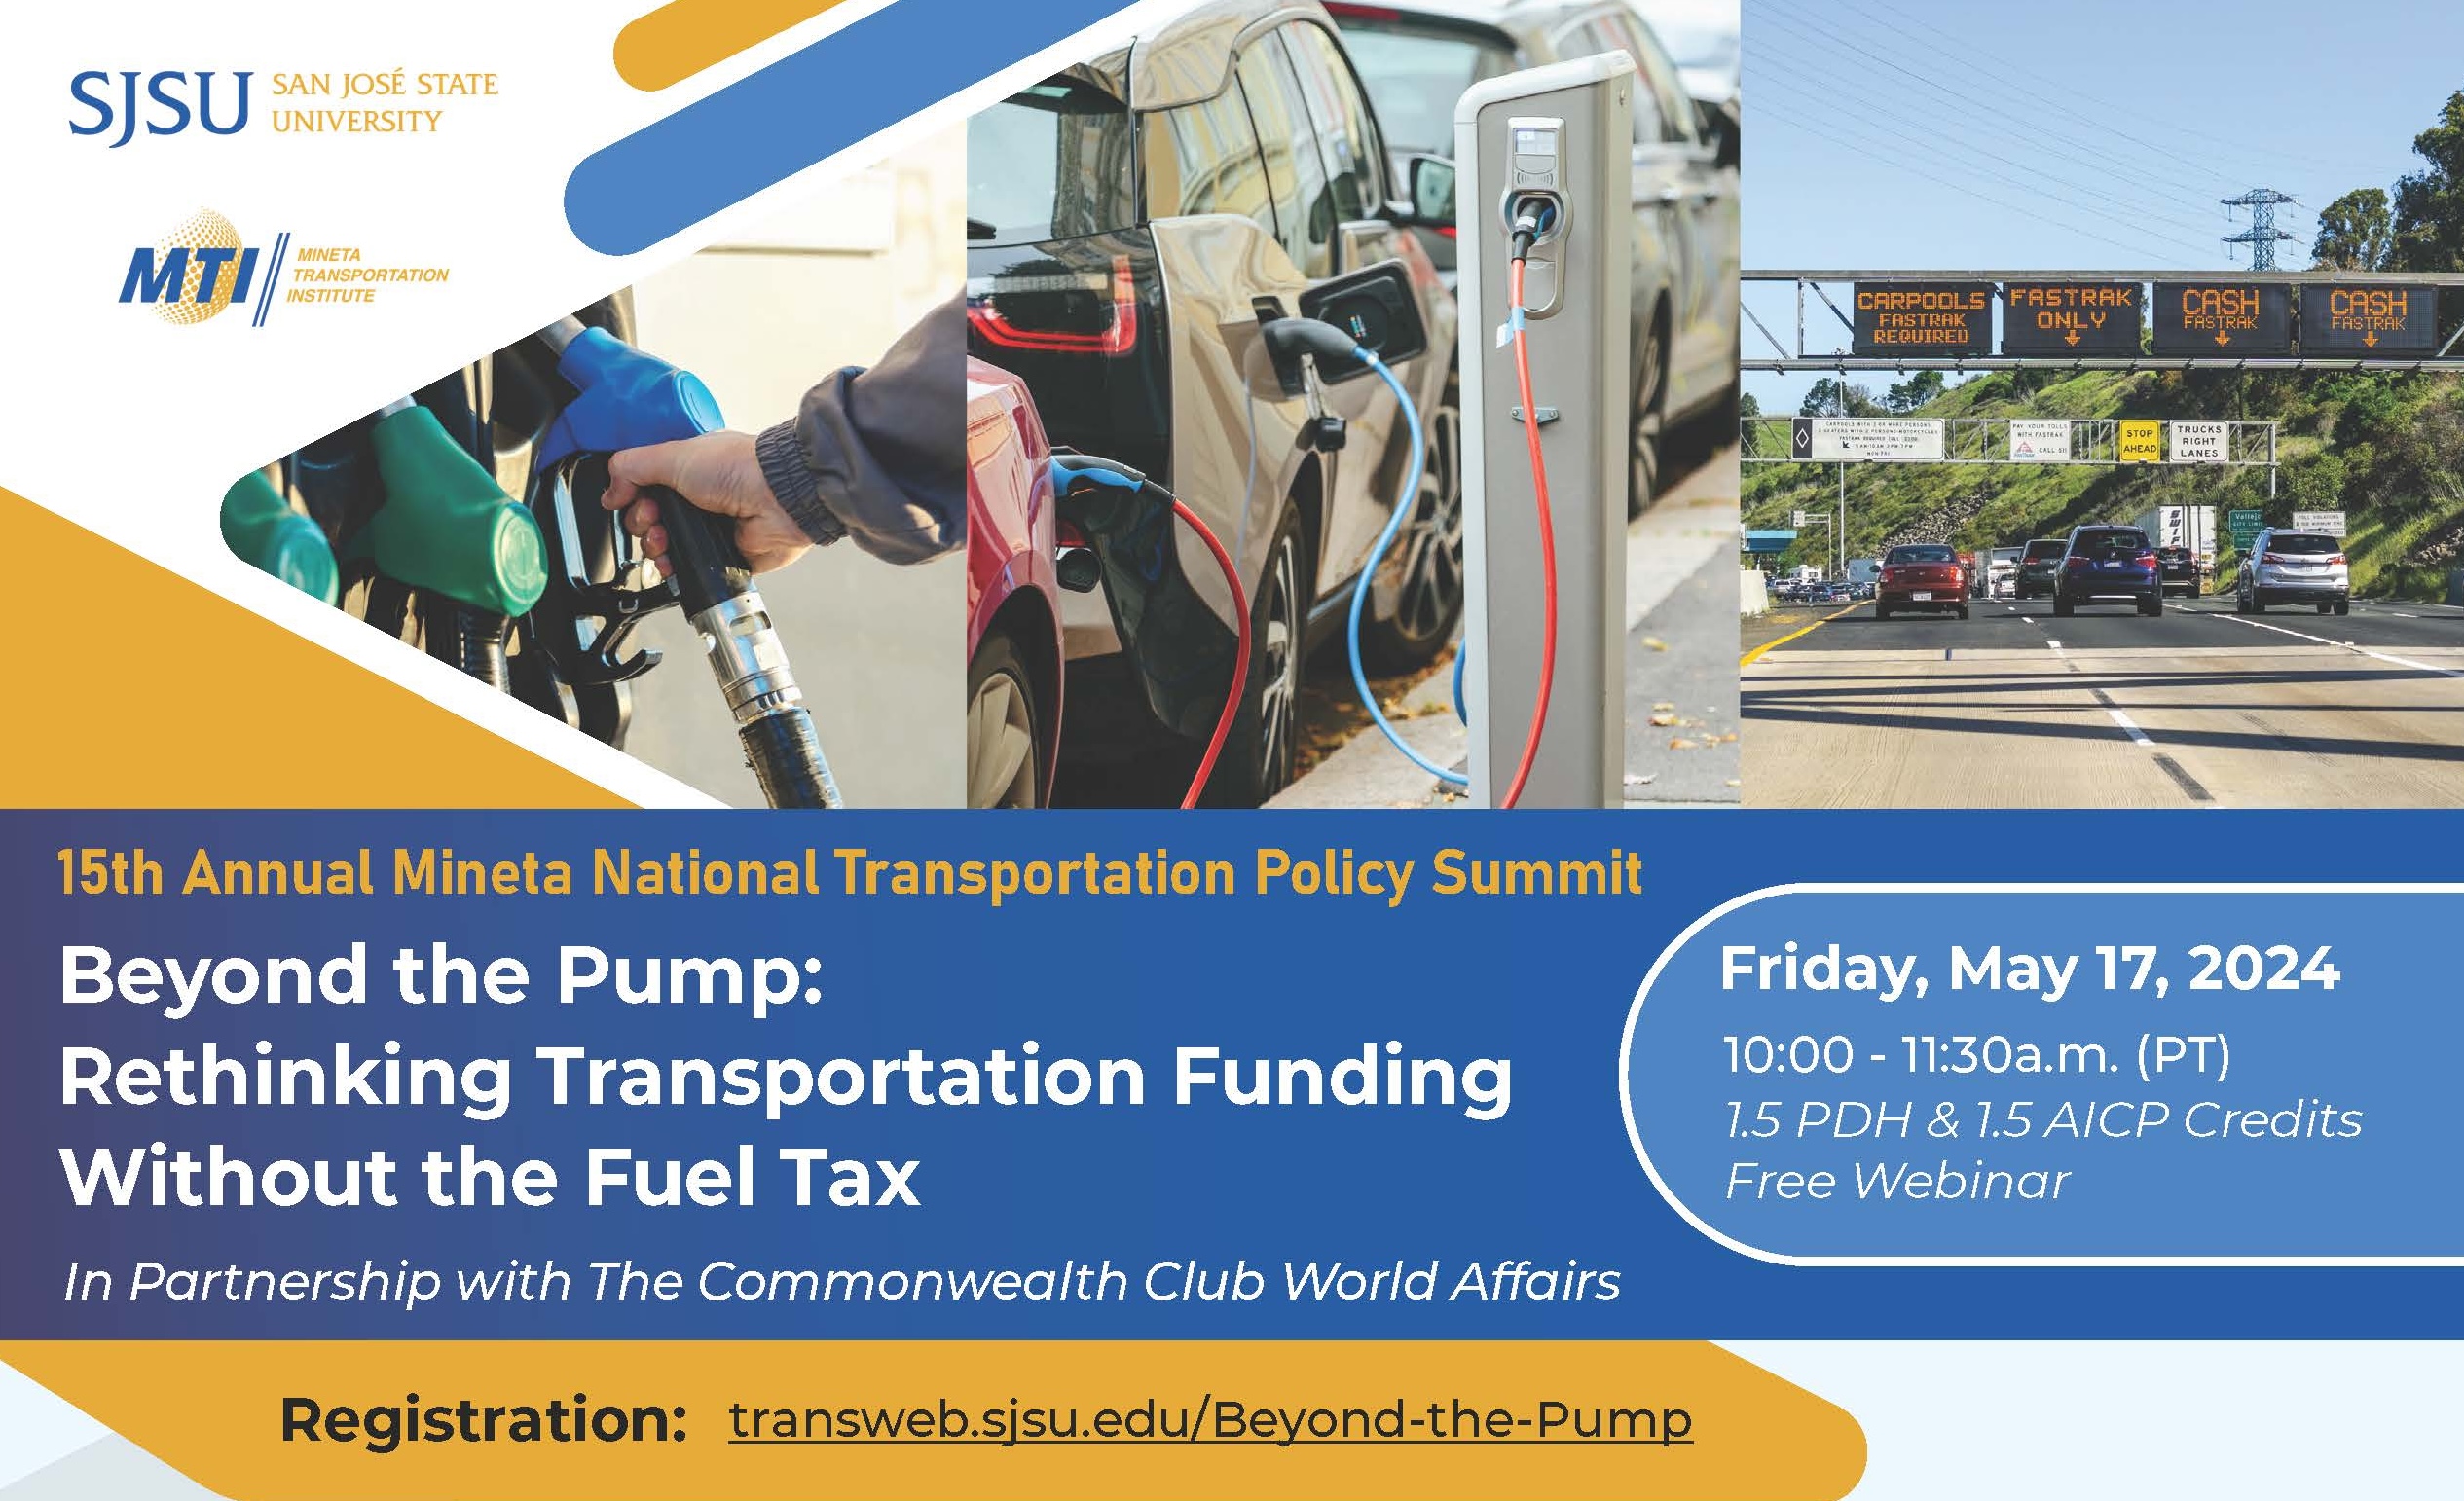 Beyond the Pump: Rethinking Transportation Funding Without the Fuel Tax